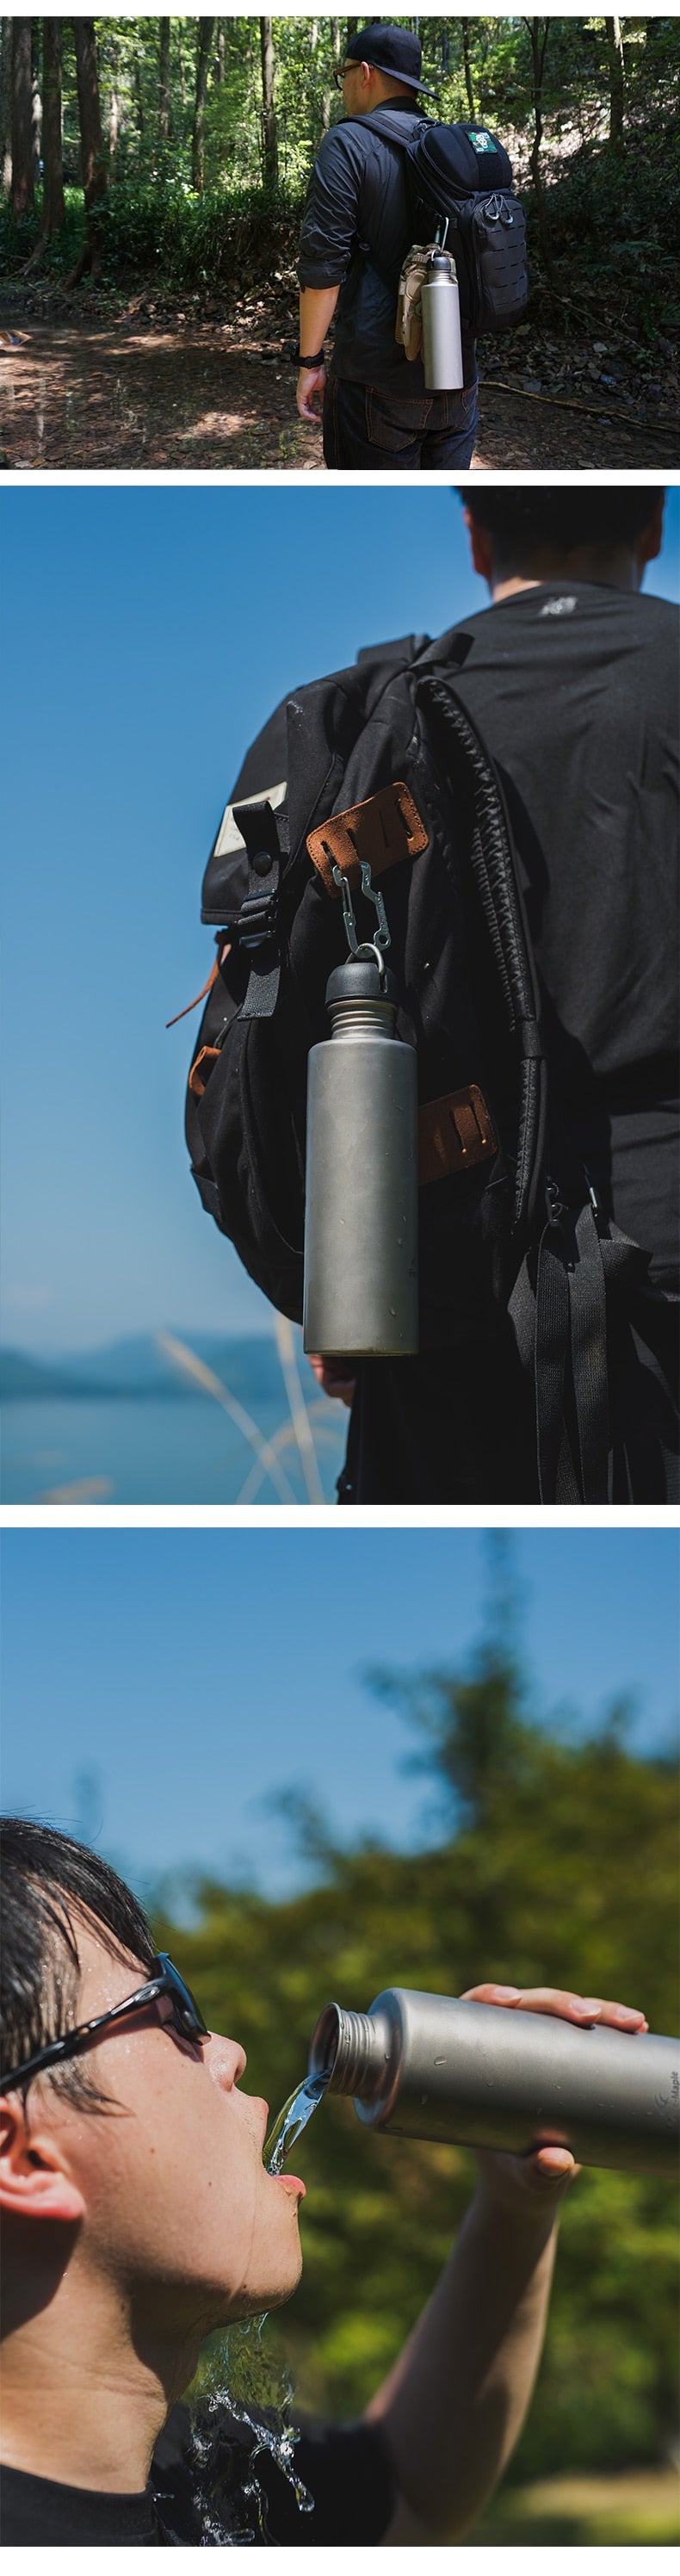 Fire Maple Titanium Water Bottle For Outdoor Camping Hiking 700ML 170g FMP-TWB - KiwisLove